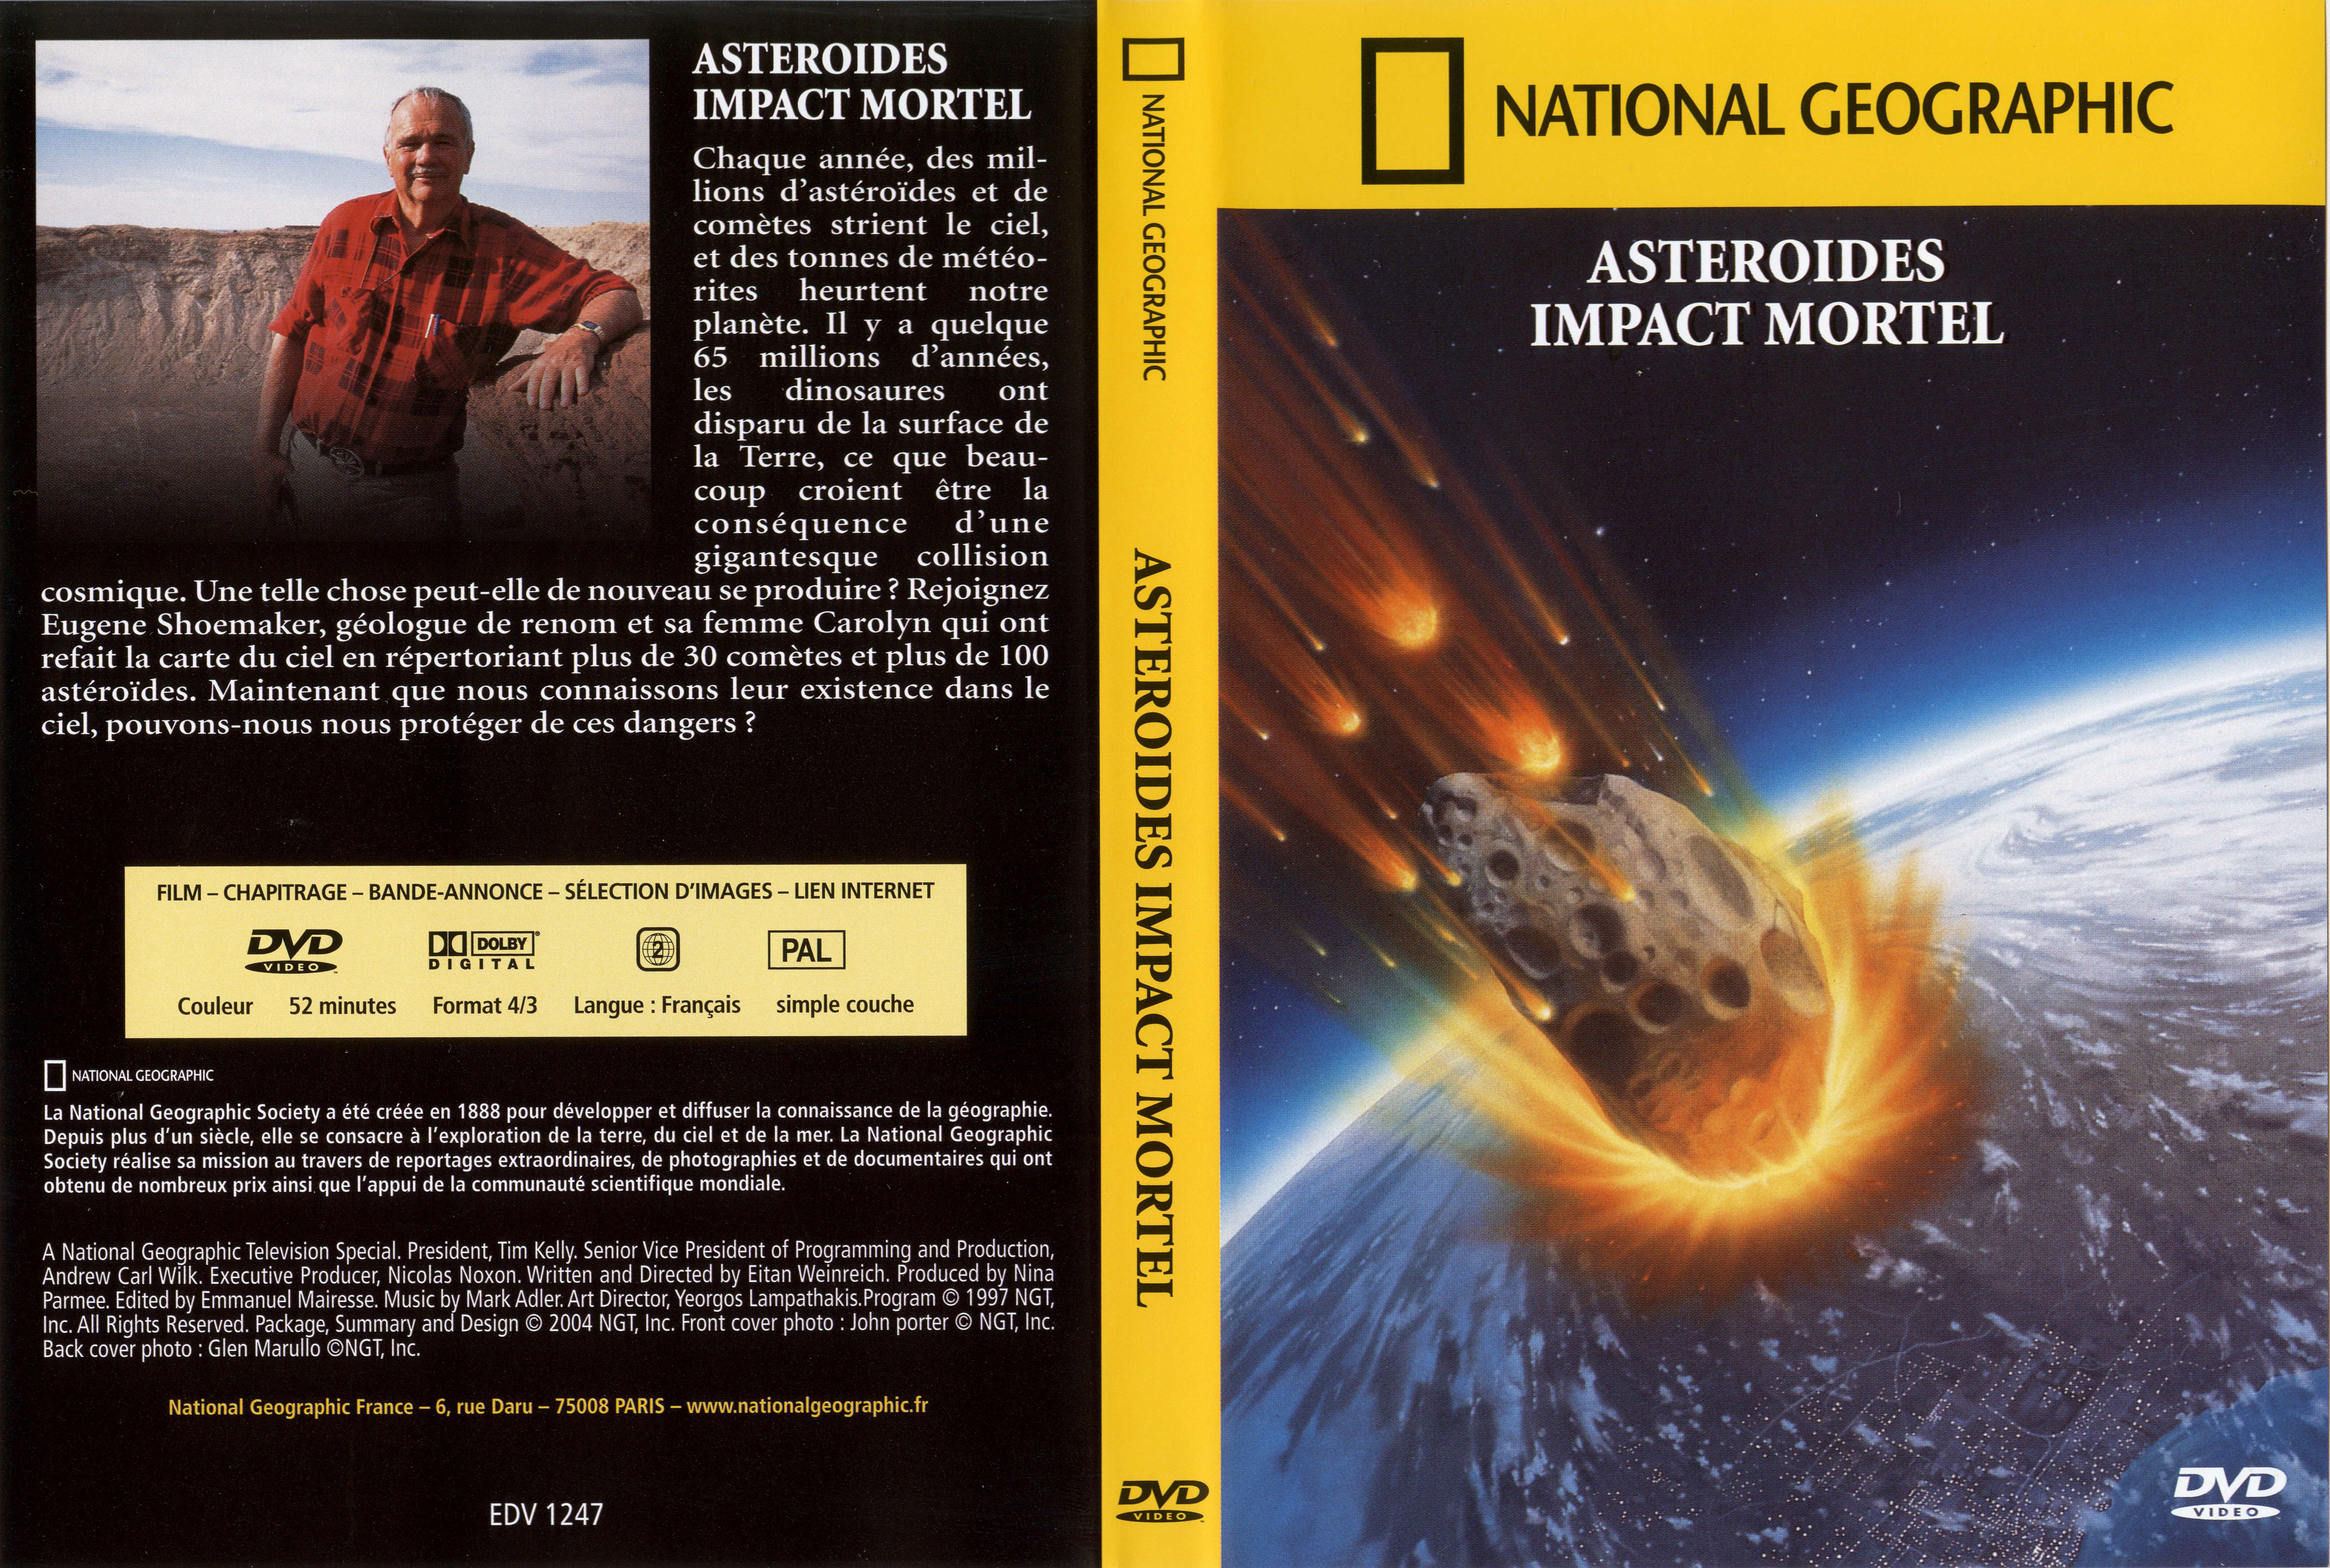 Jaquette DVD National Geographic - Asteroides impact mortel